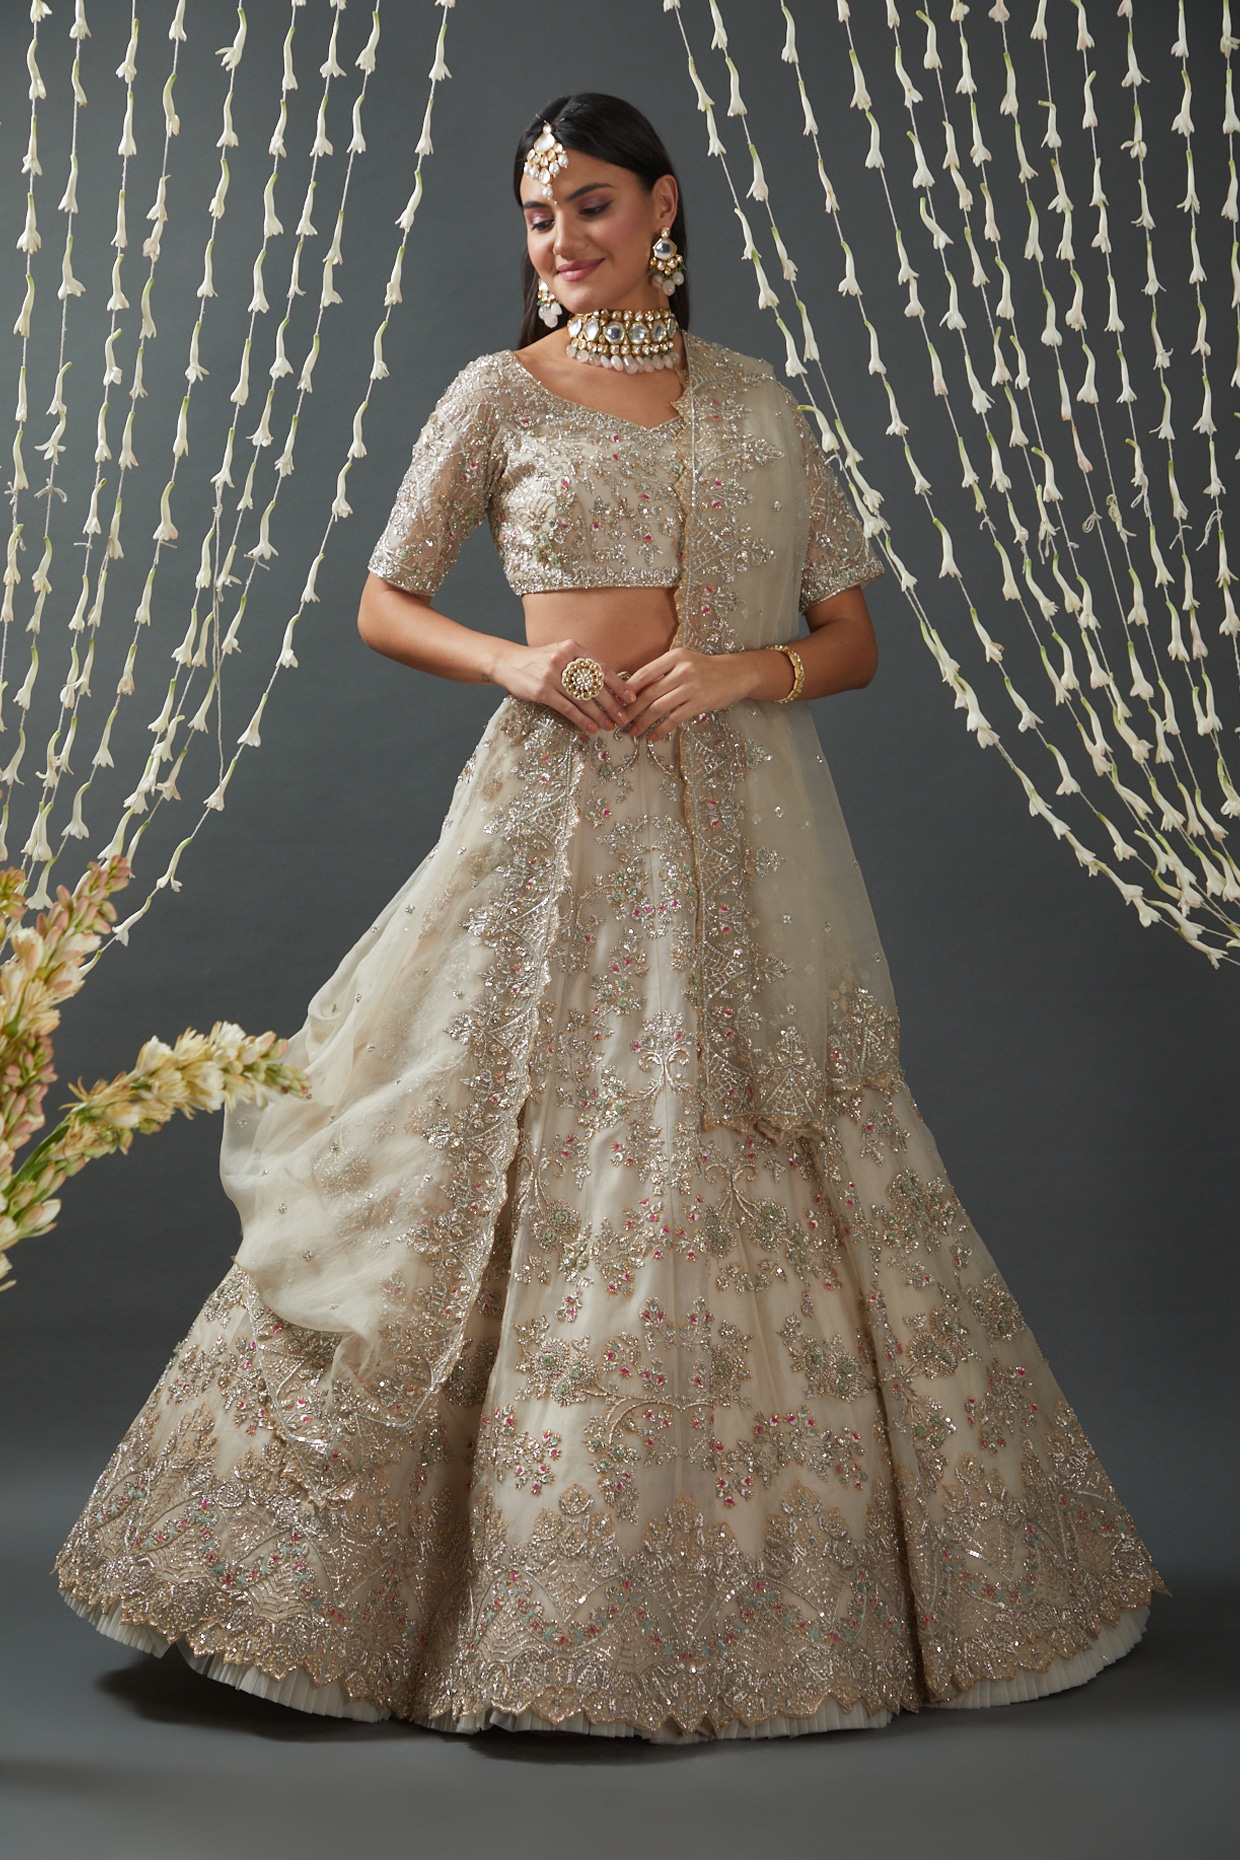 Indian Wedding Gowns: Stunning Designs for Brides-To-Be